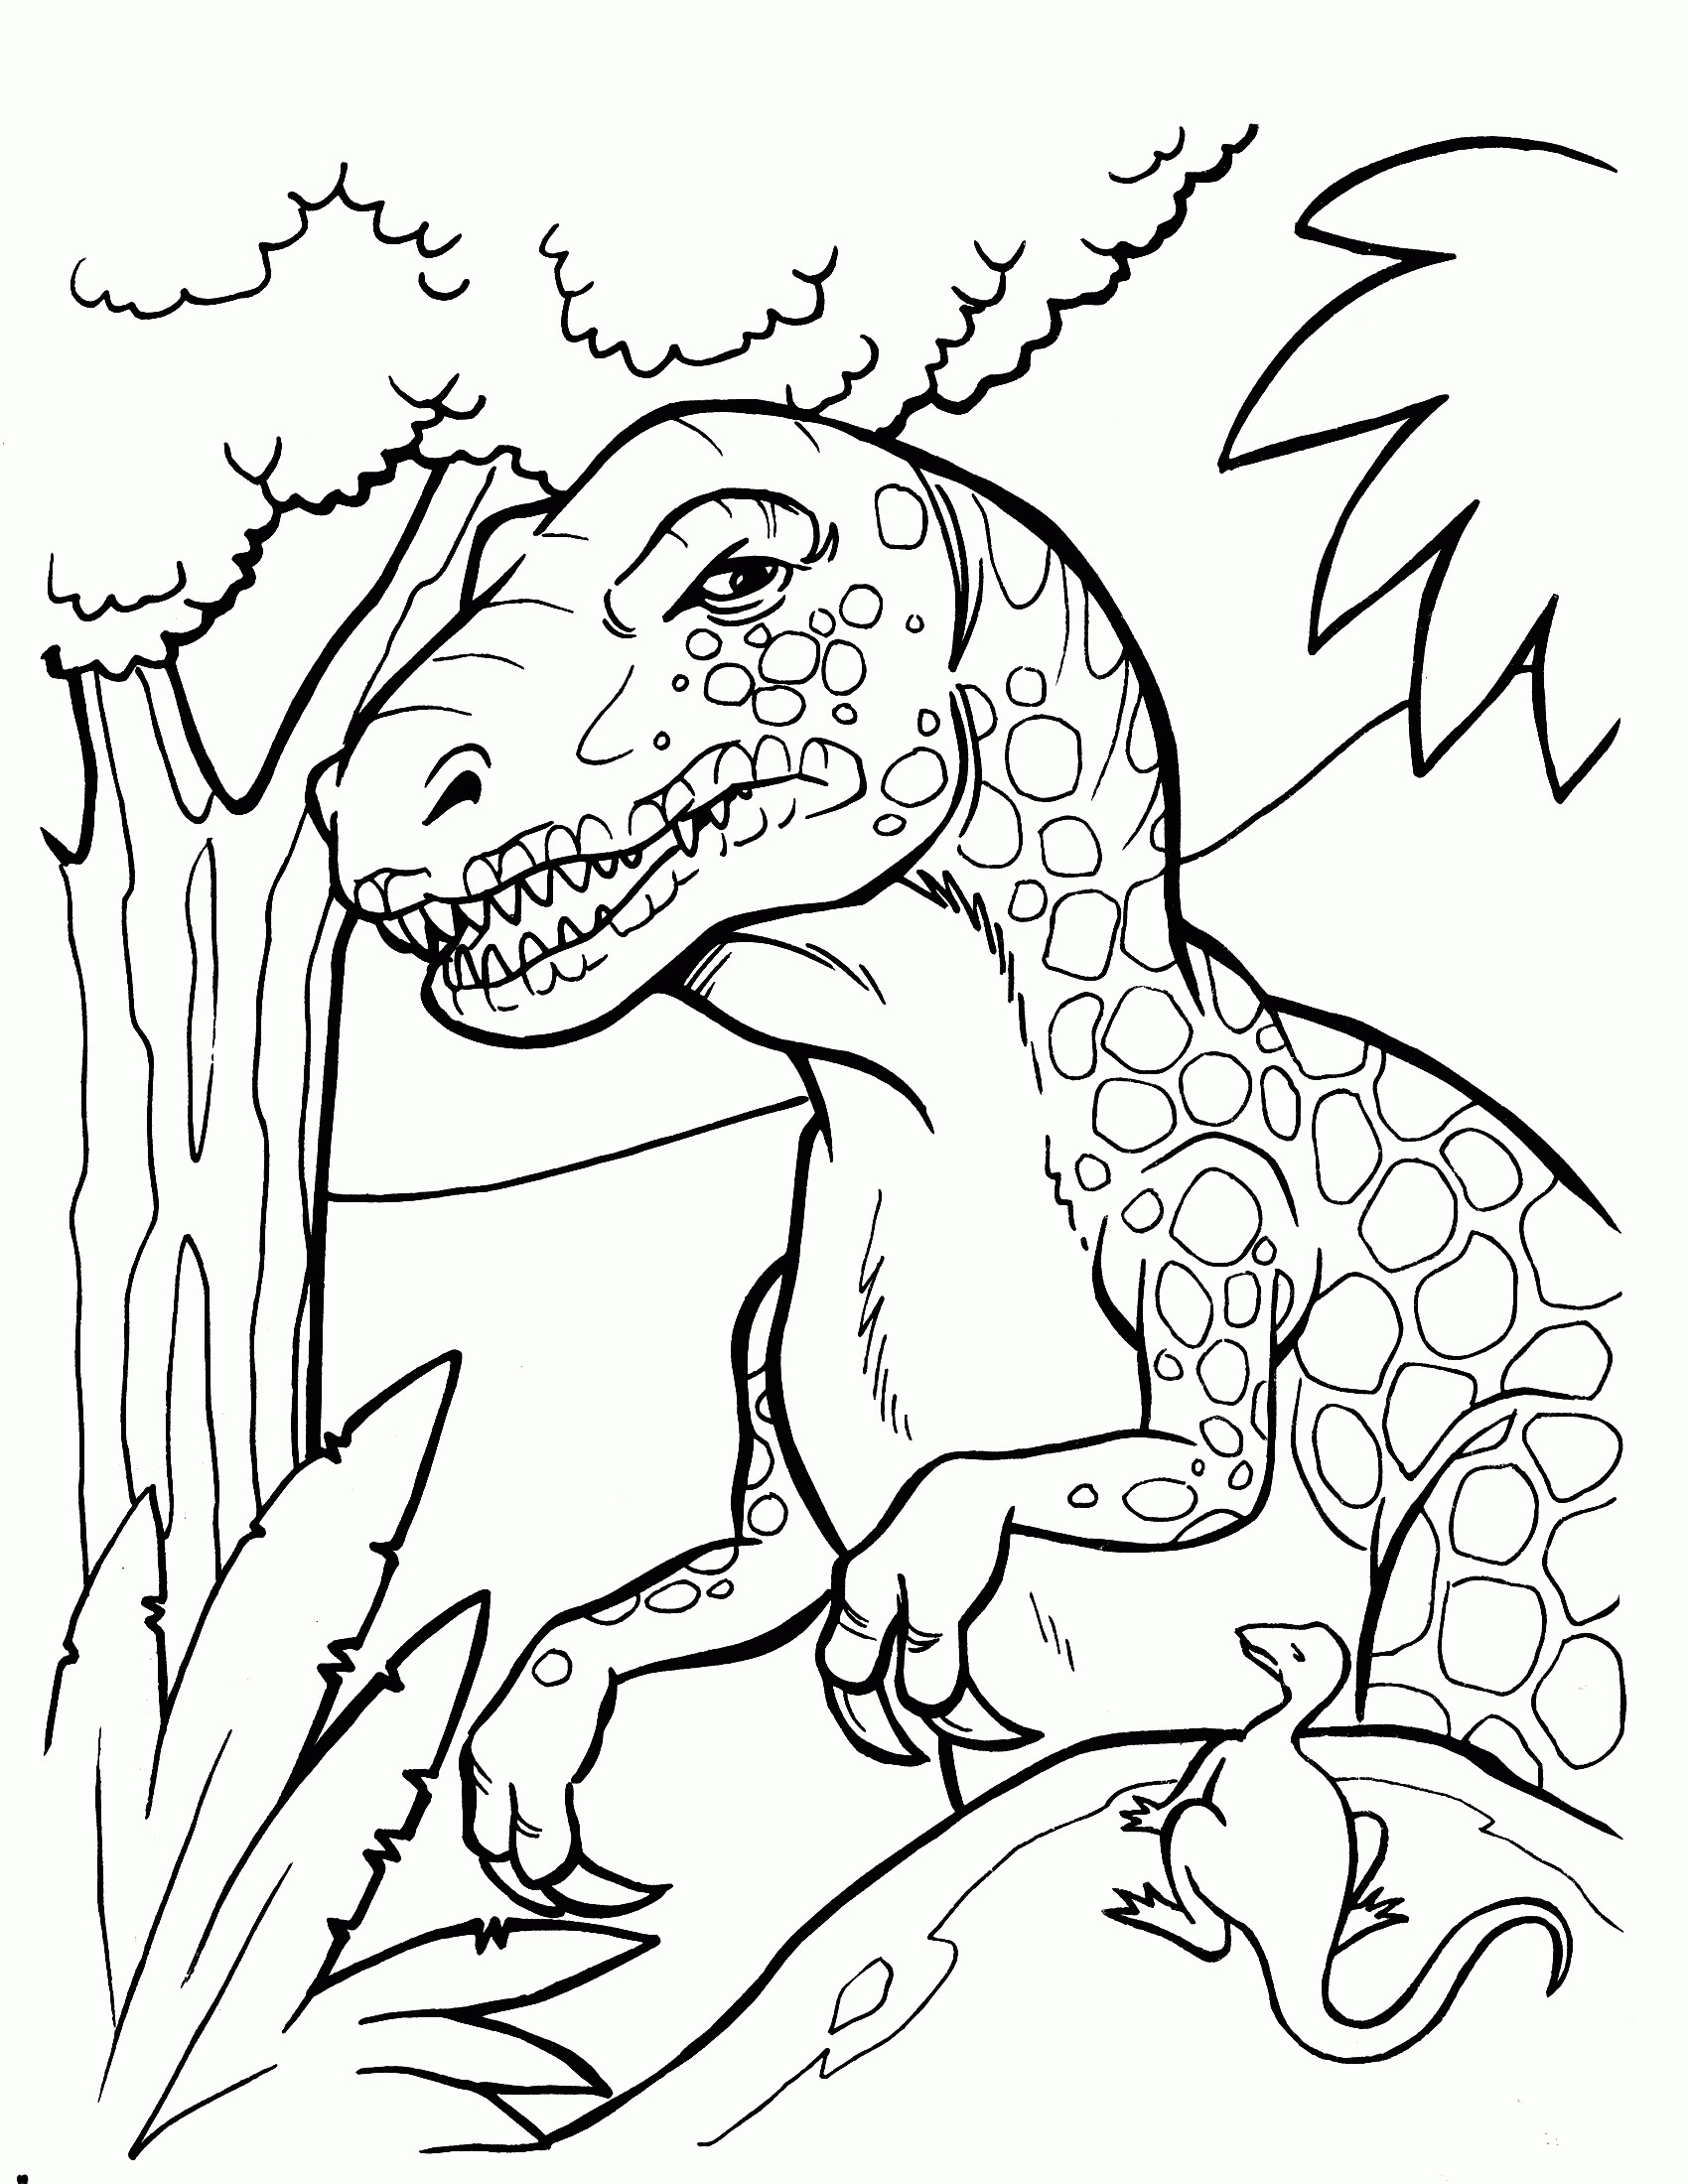 The Best Ideas for Coloring Pages for Kids Dinosaurs - Home, Family ...